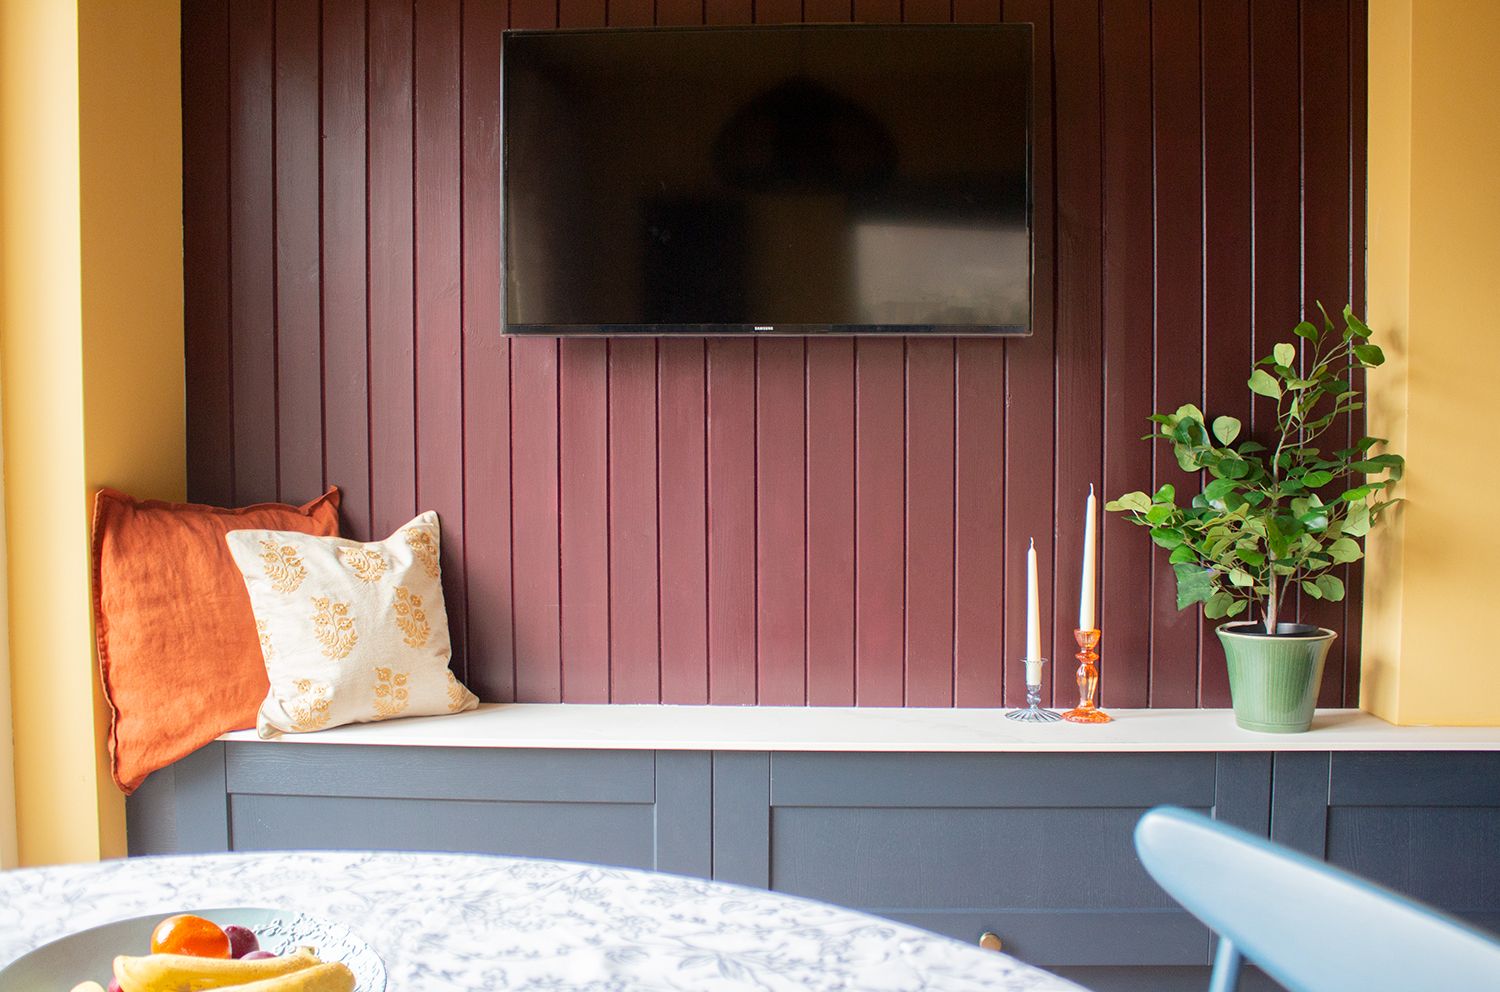 A photo showing the aubergine painted tongue and groove paneling behind the TV, with the bench seating in front.